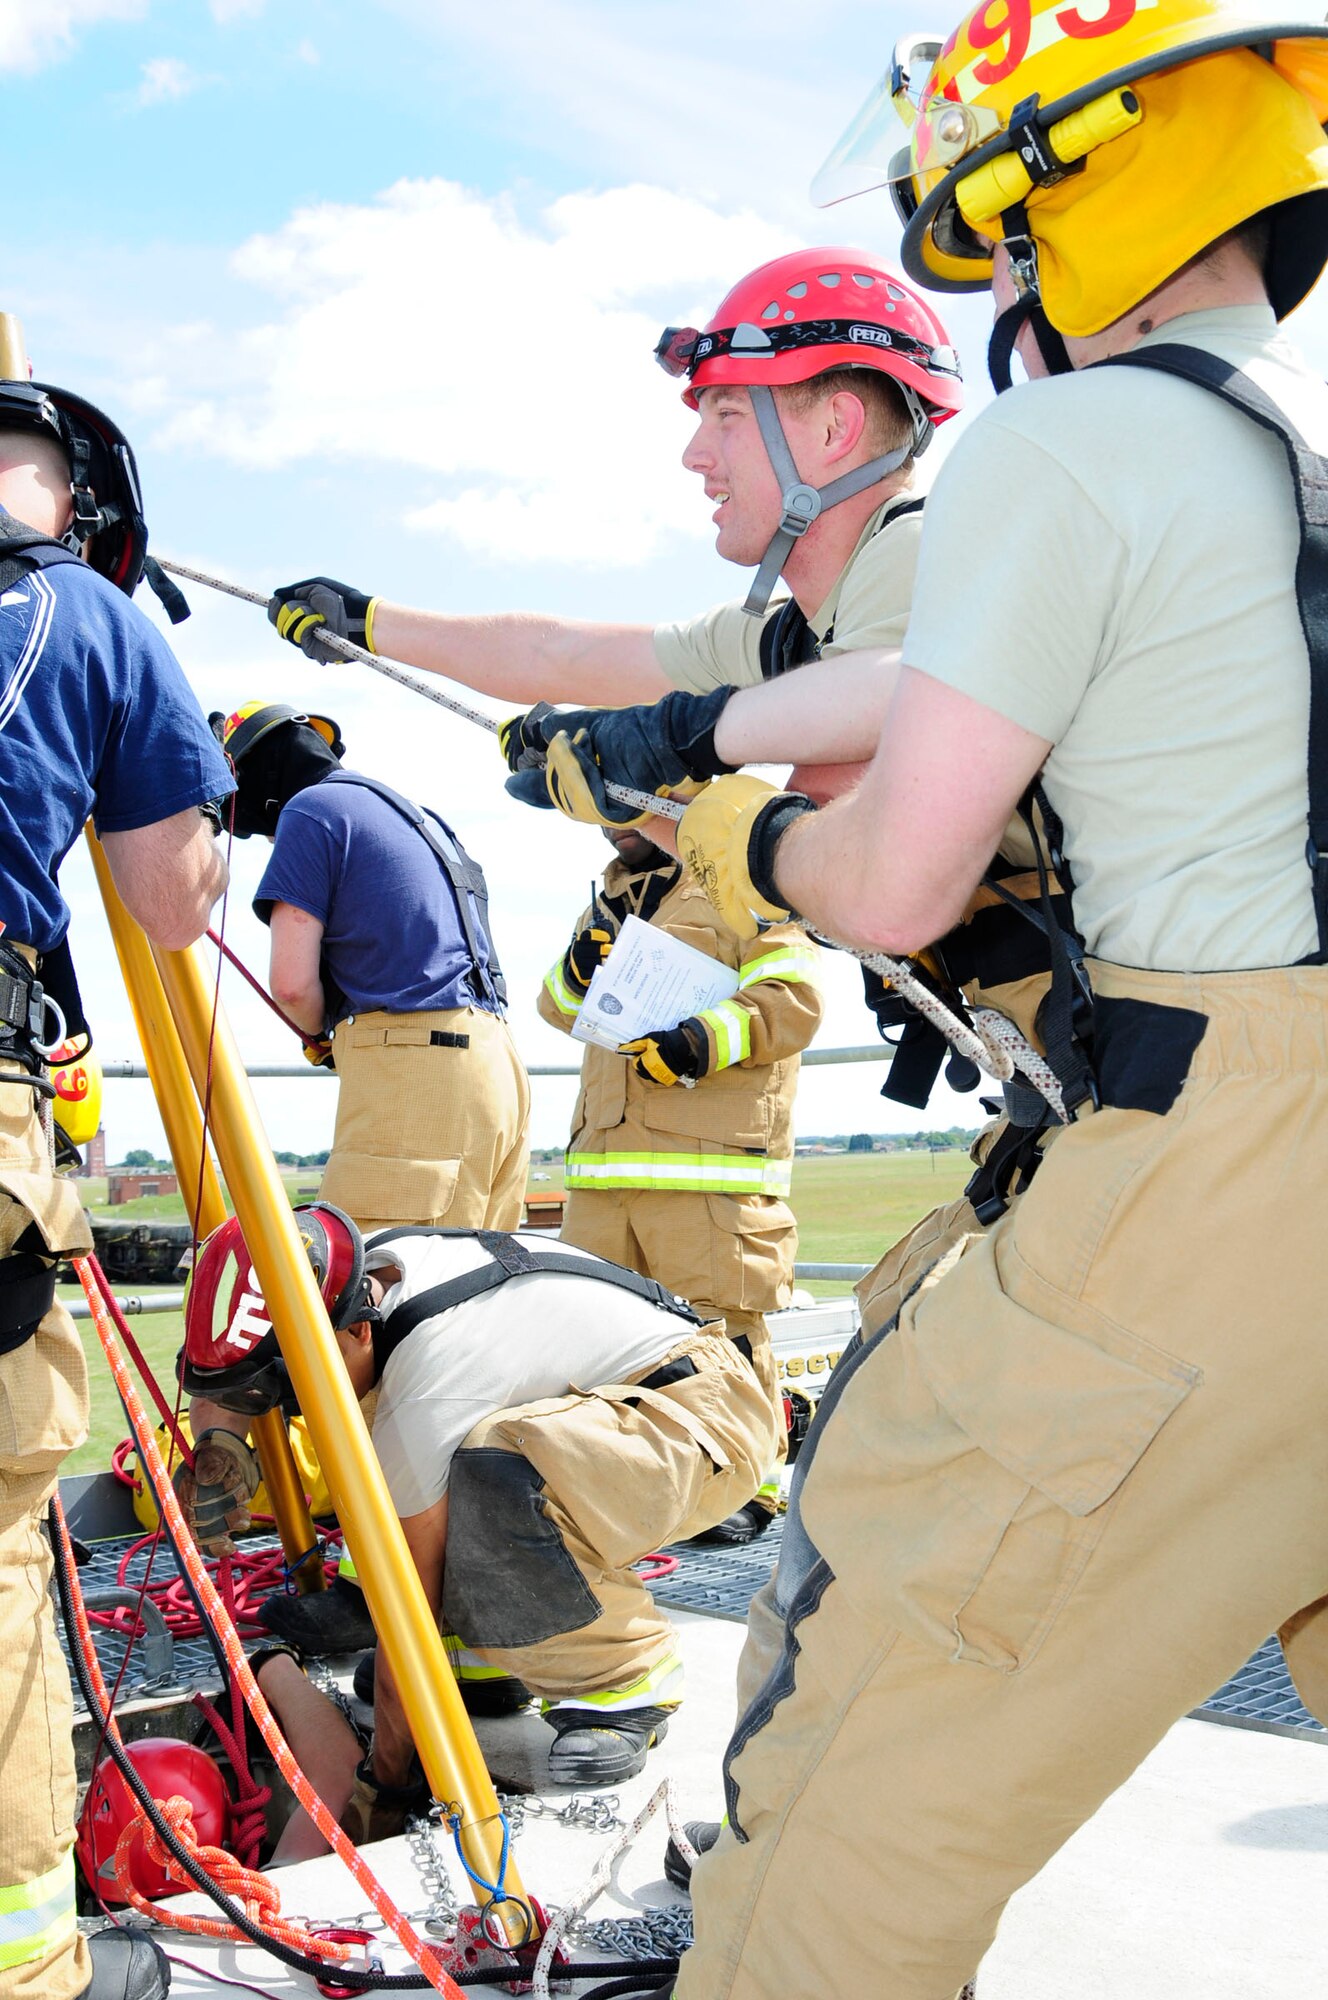 Firefighters from the 100th Civil Engineer Squadron Fire Department raise a responder from a confined space using a mechanical advantage system during confined-space training June 26, 2014, on RAF Mildenhall, England. Firefighters perform a wide variety of training to hone their life-saving skills and ensure they’re prepared for any emergency. (U.S. Air Force photo/Karen Abeyasekere/Released)